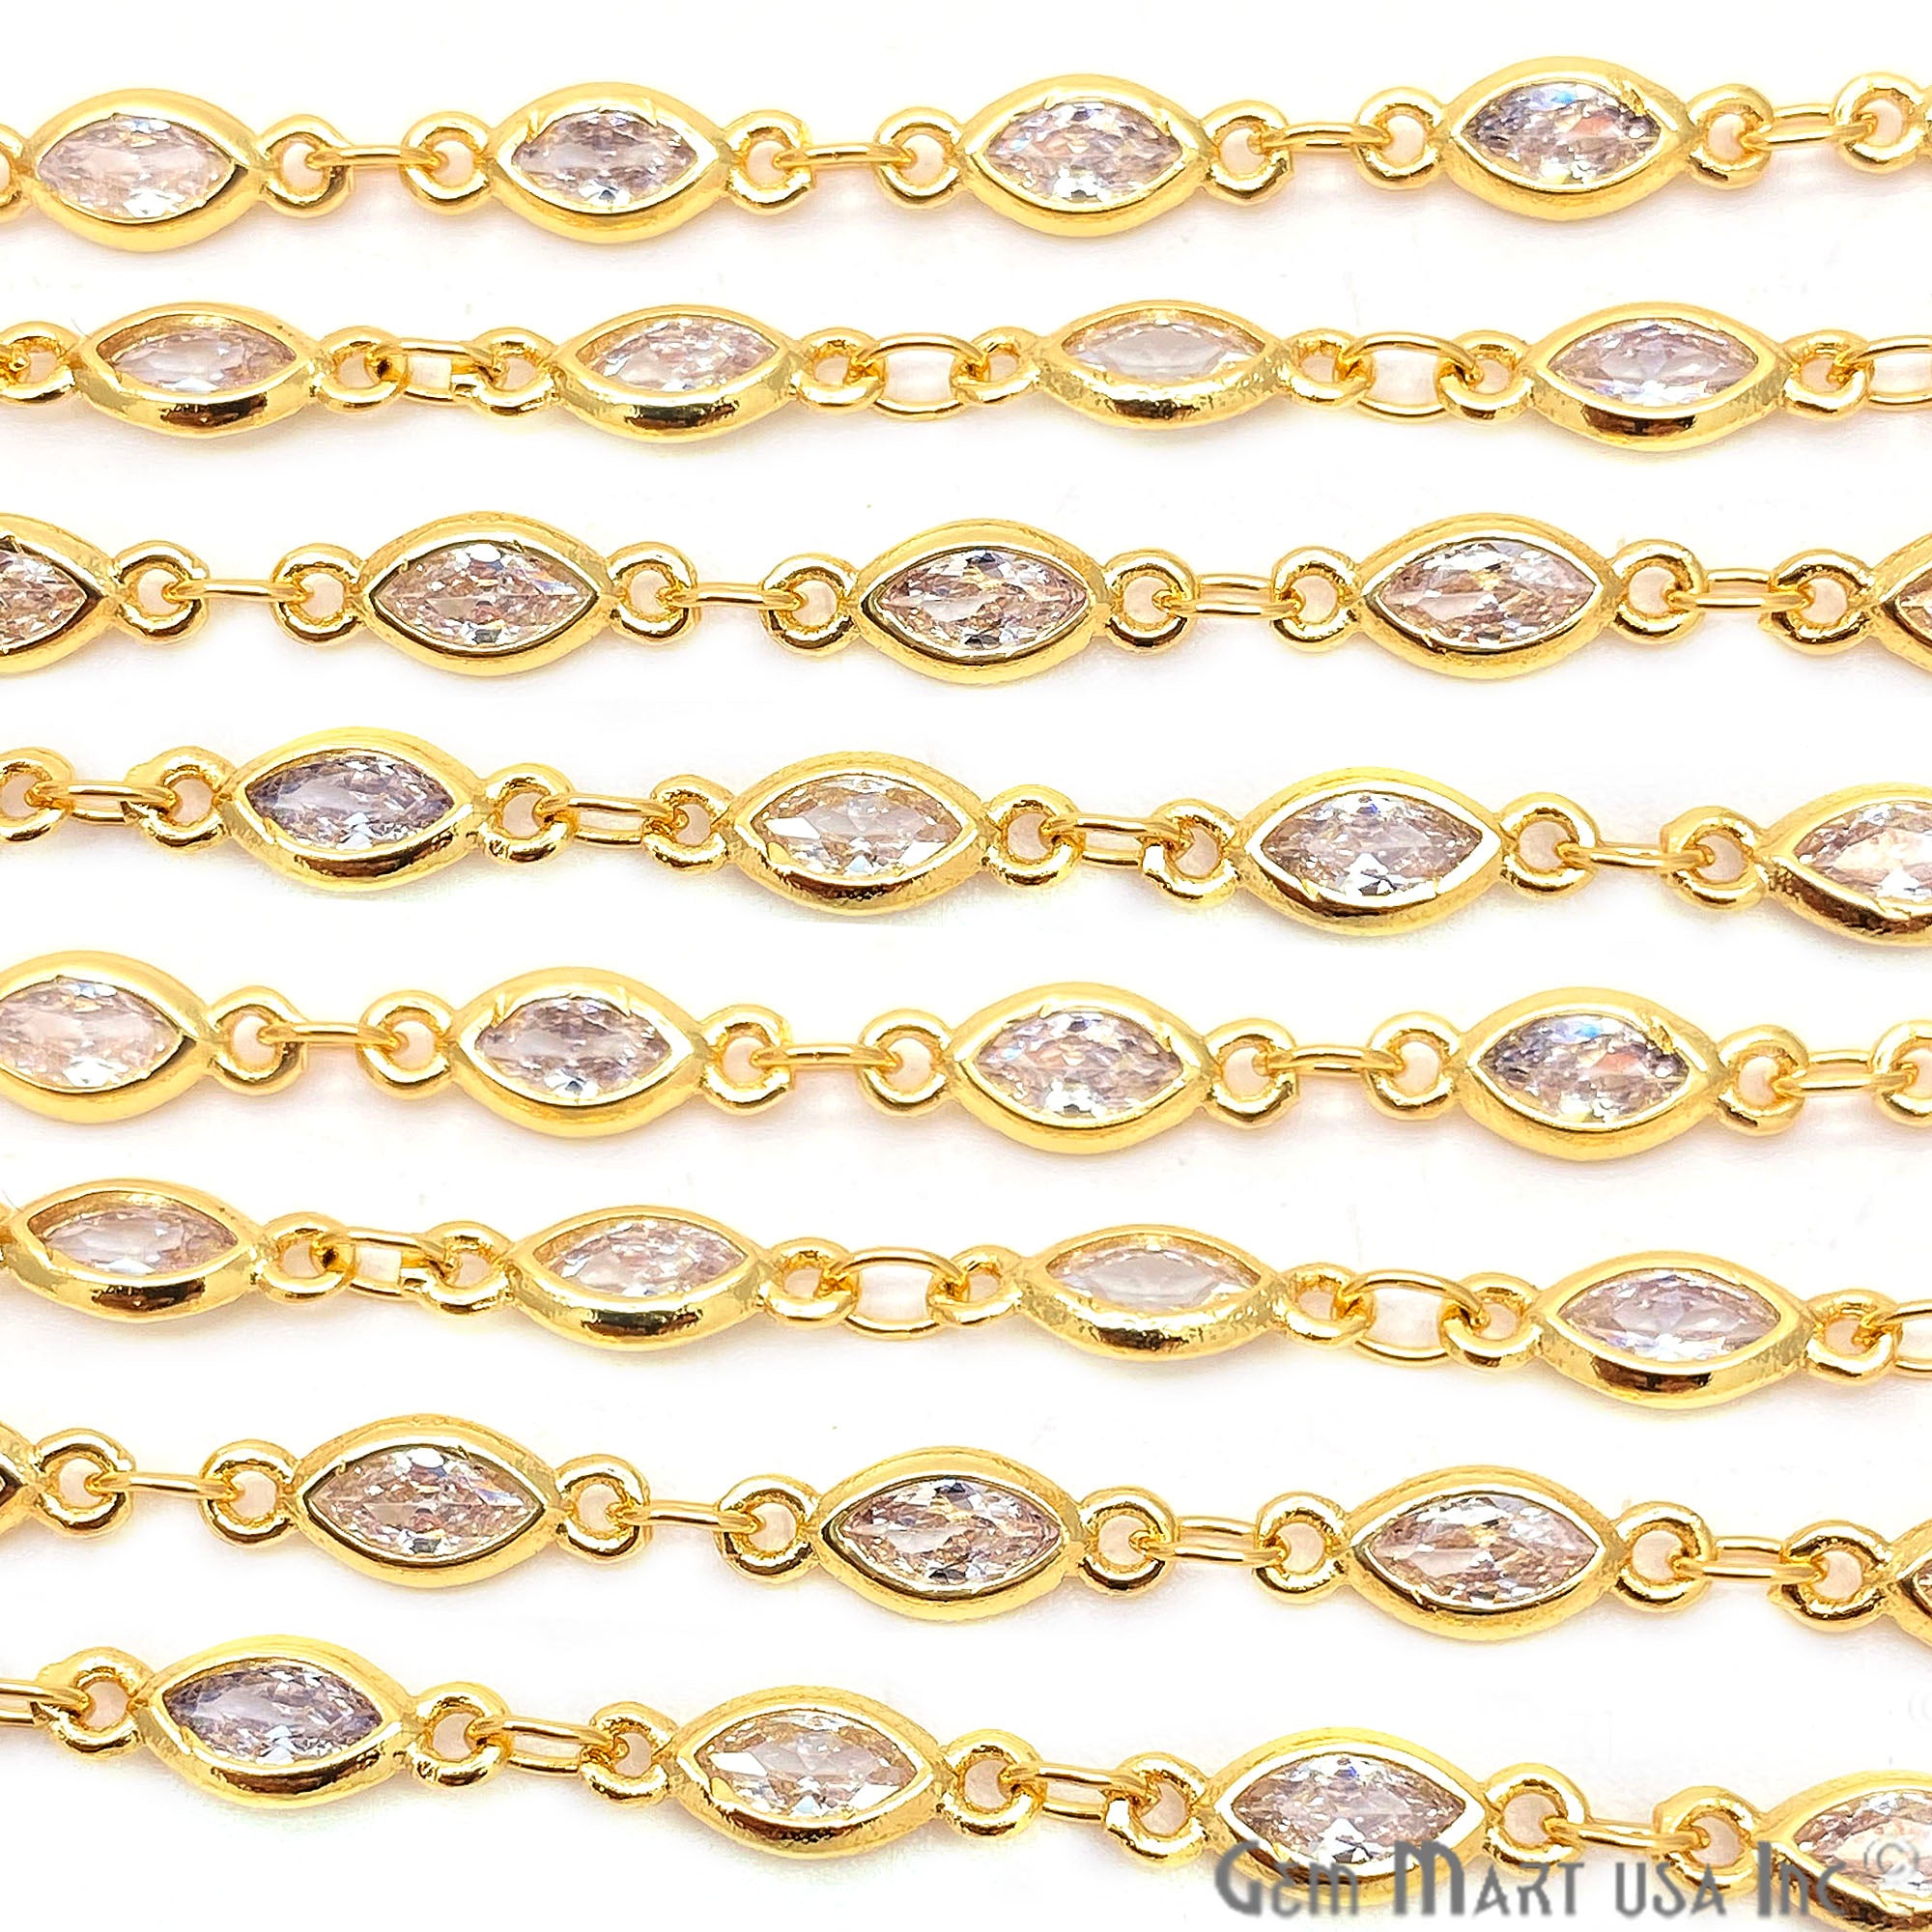 White Zircon Marquise Shape 6.5x3.5mm Gold Plated Continuous Connector Chain - GemMartUSA